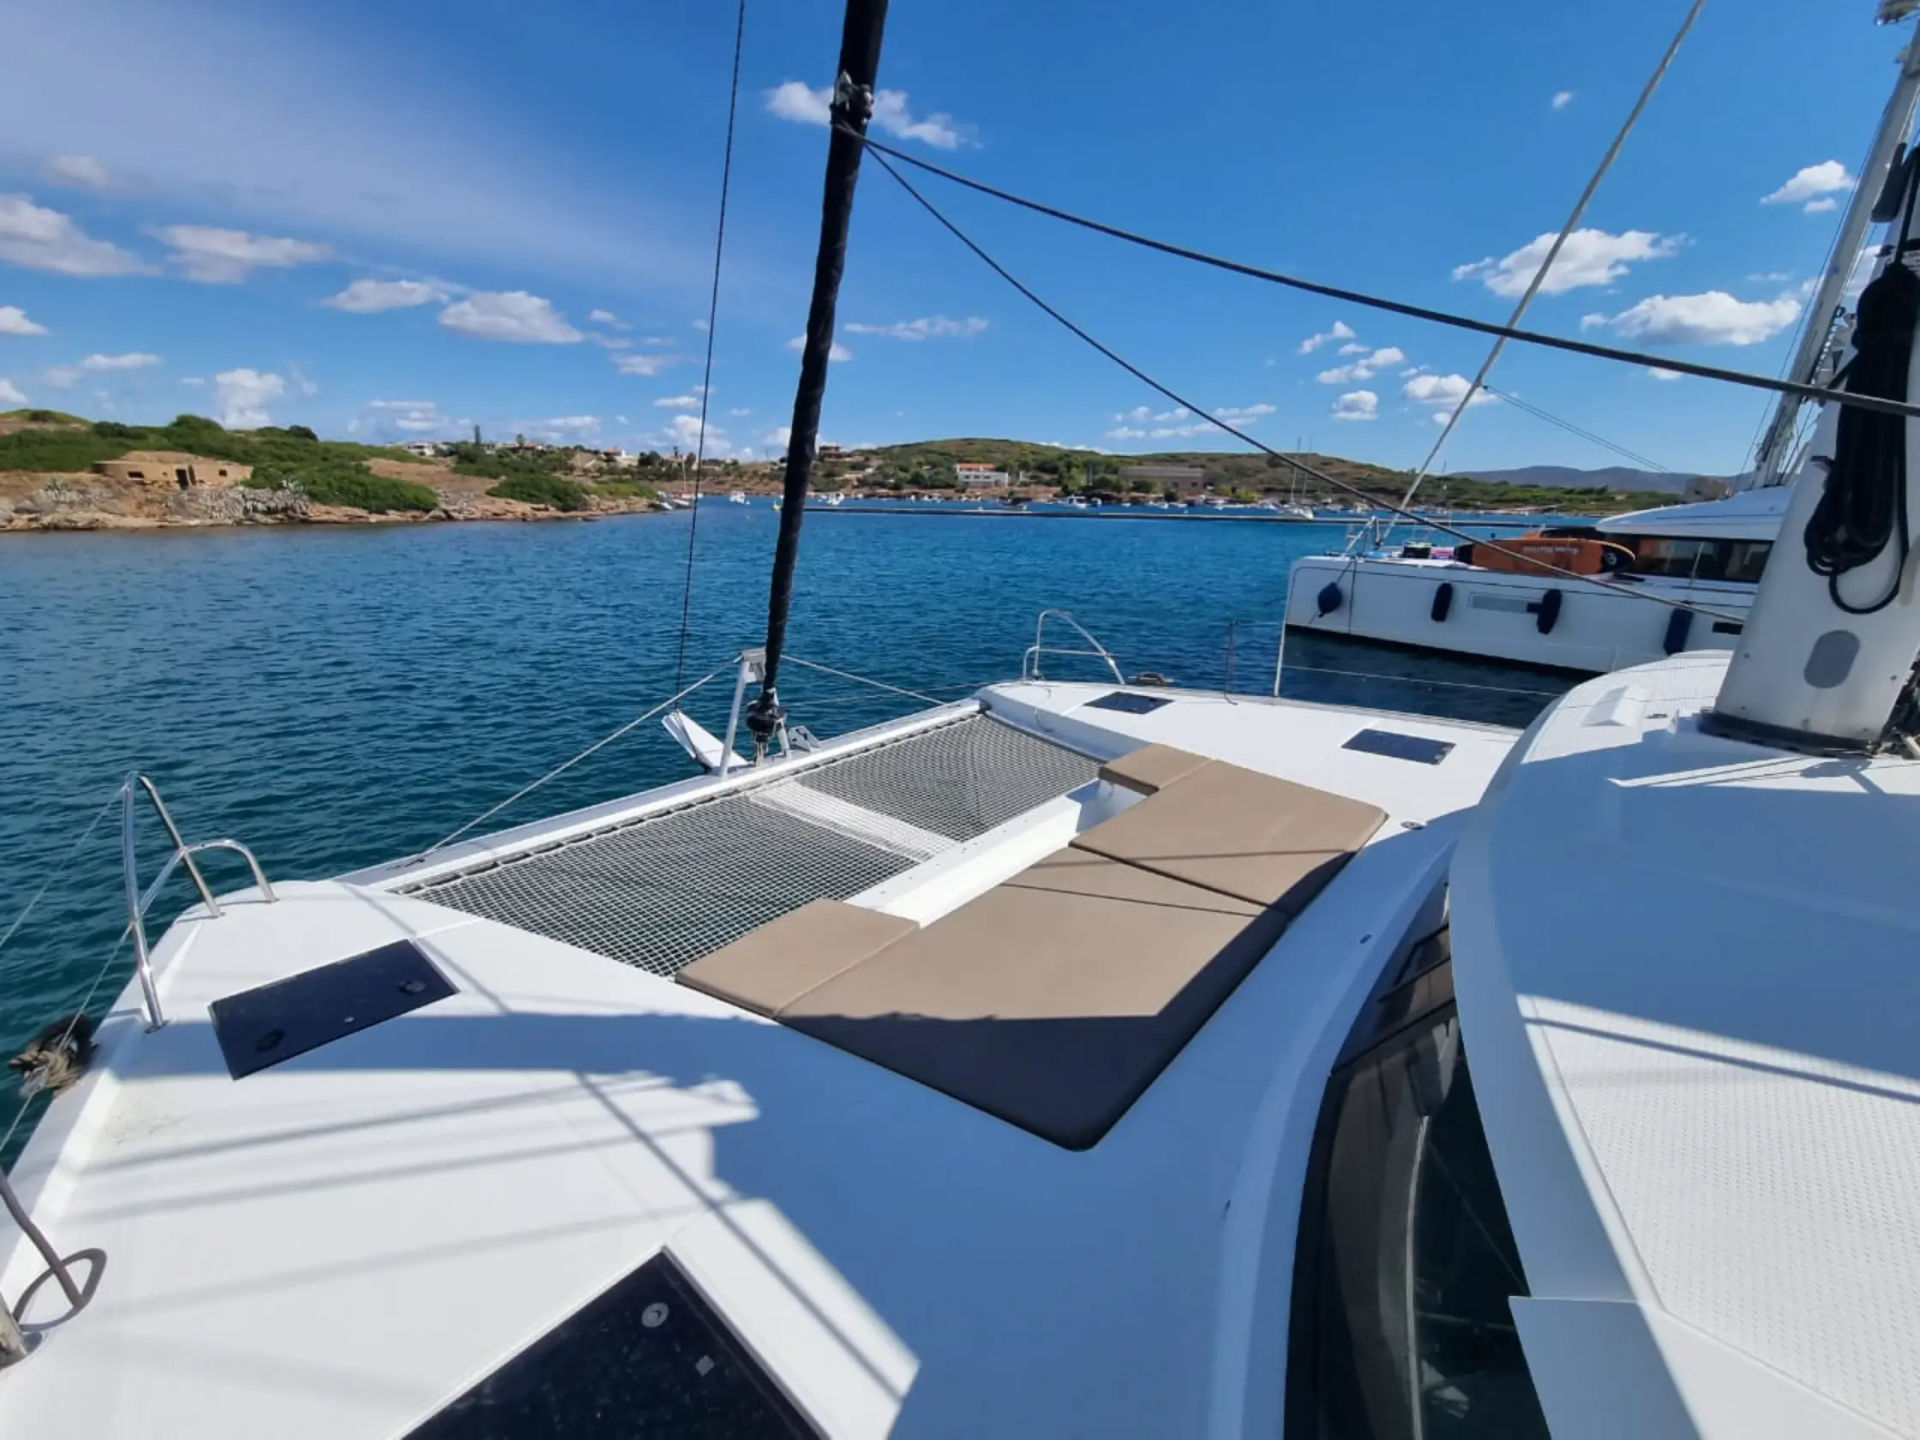 Fountaine Pajot 42 Catamaran Half-Day Cruise - Athenian Riviera Sailing Experience Golden Yachting and Sailing